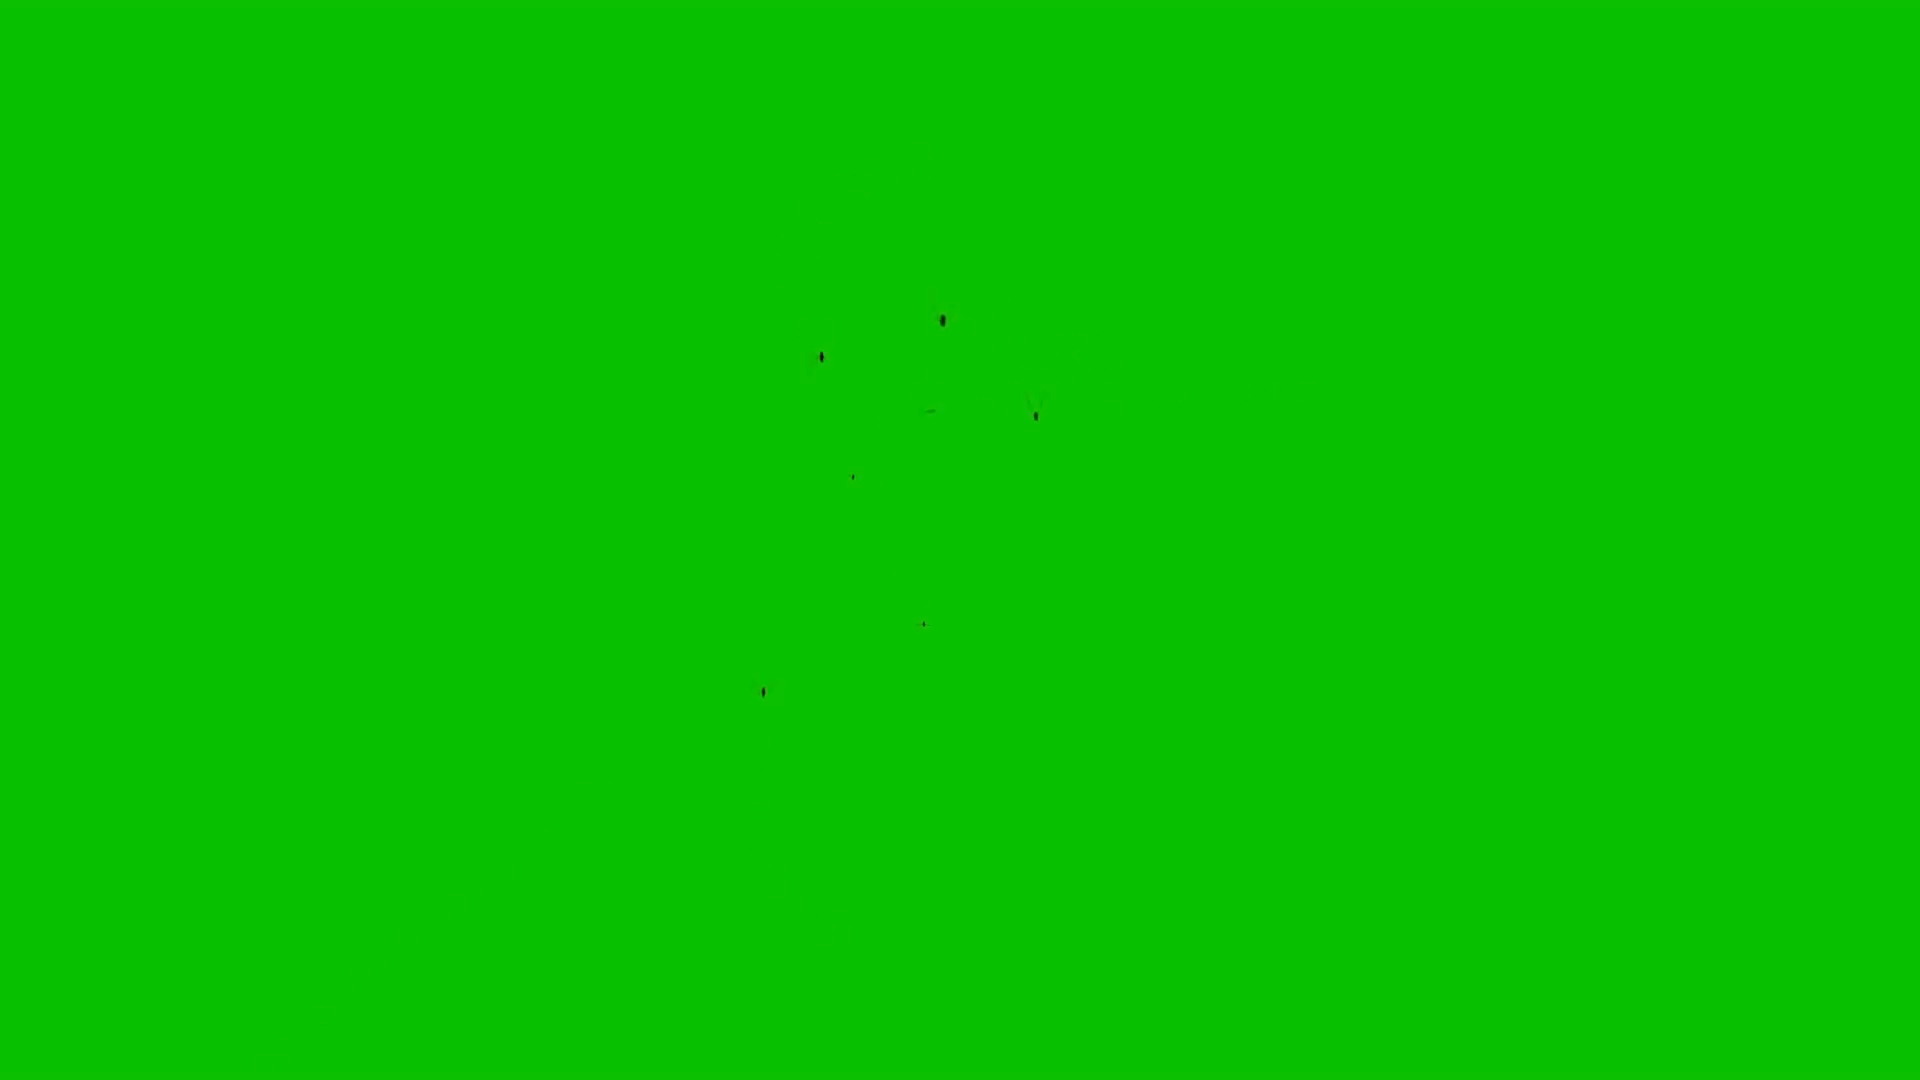 Swarm of Mosquitoes / Flies / Bees / Insects on a Green Screen